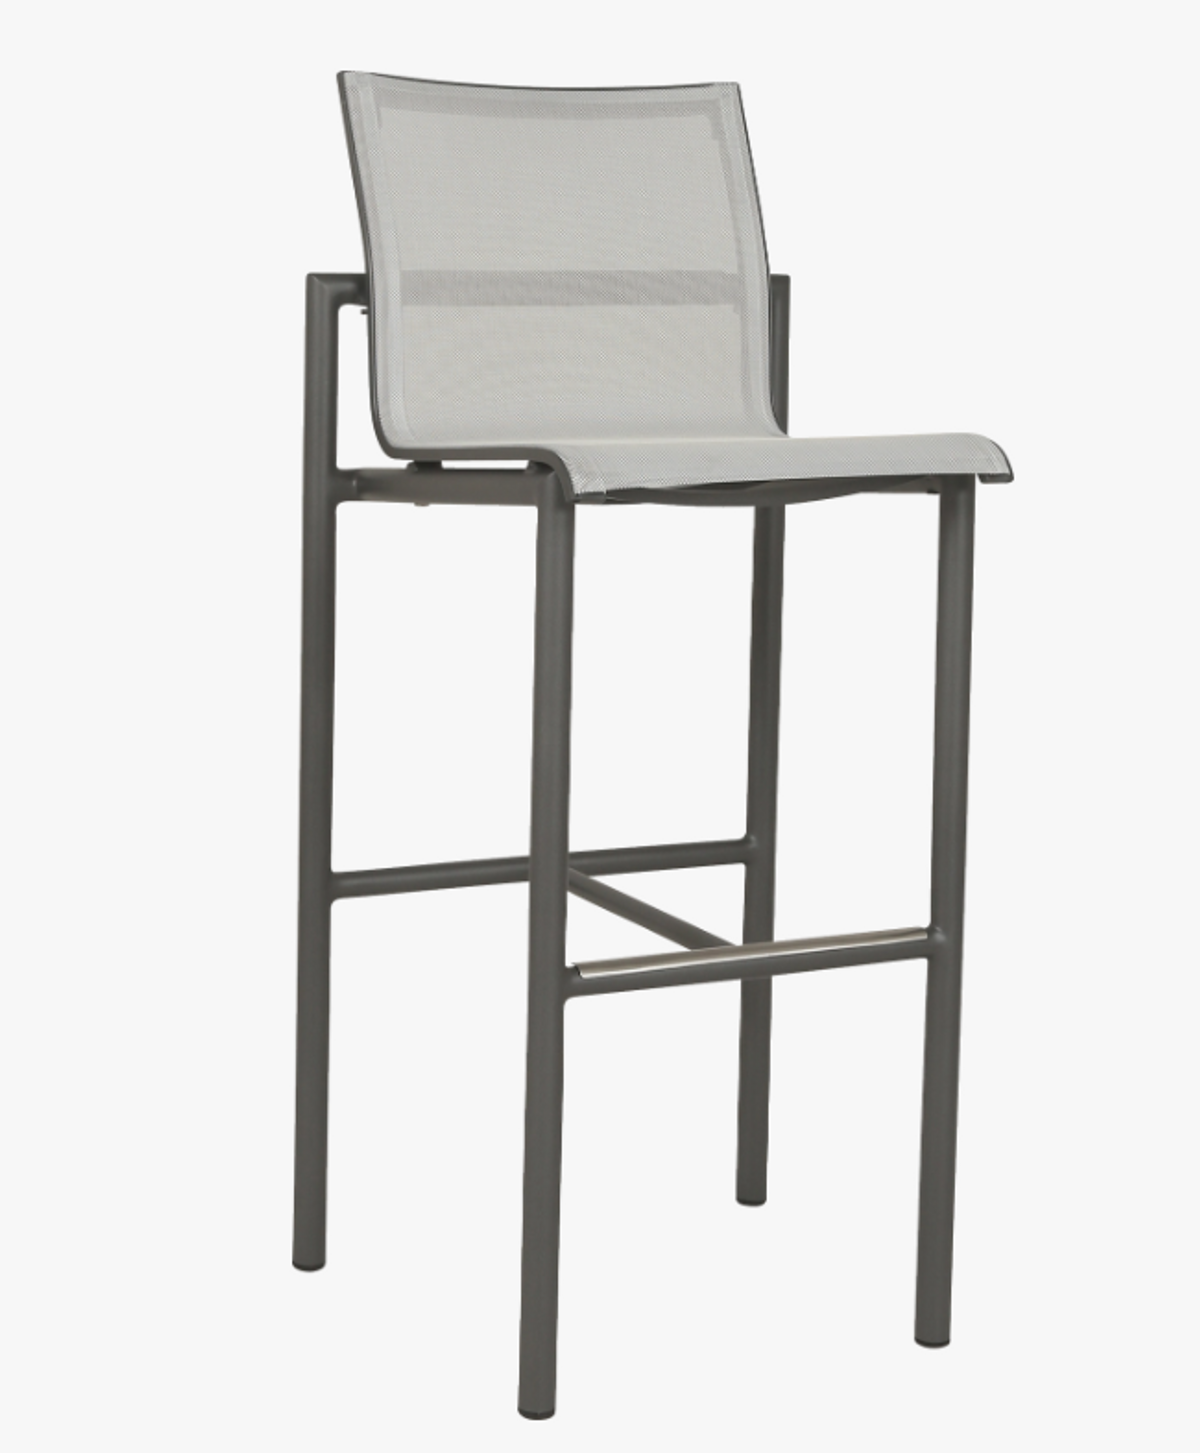 FRED Galvanised steel and Wicker Outdoor Bar Stool - Stone White